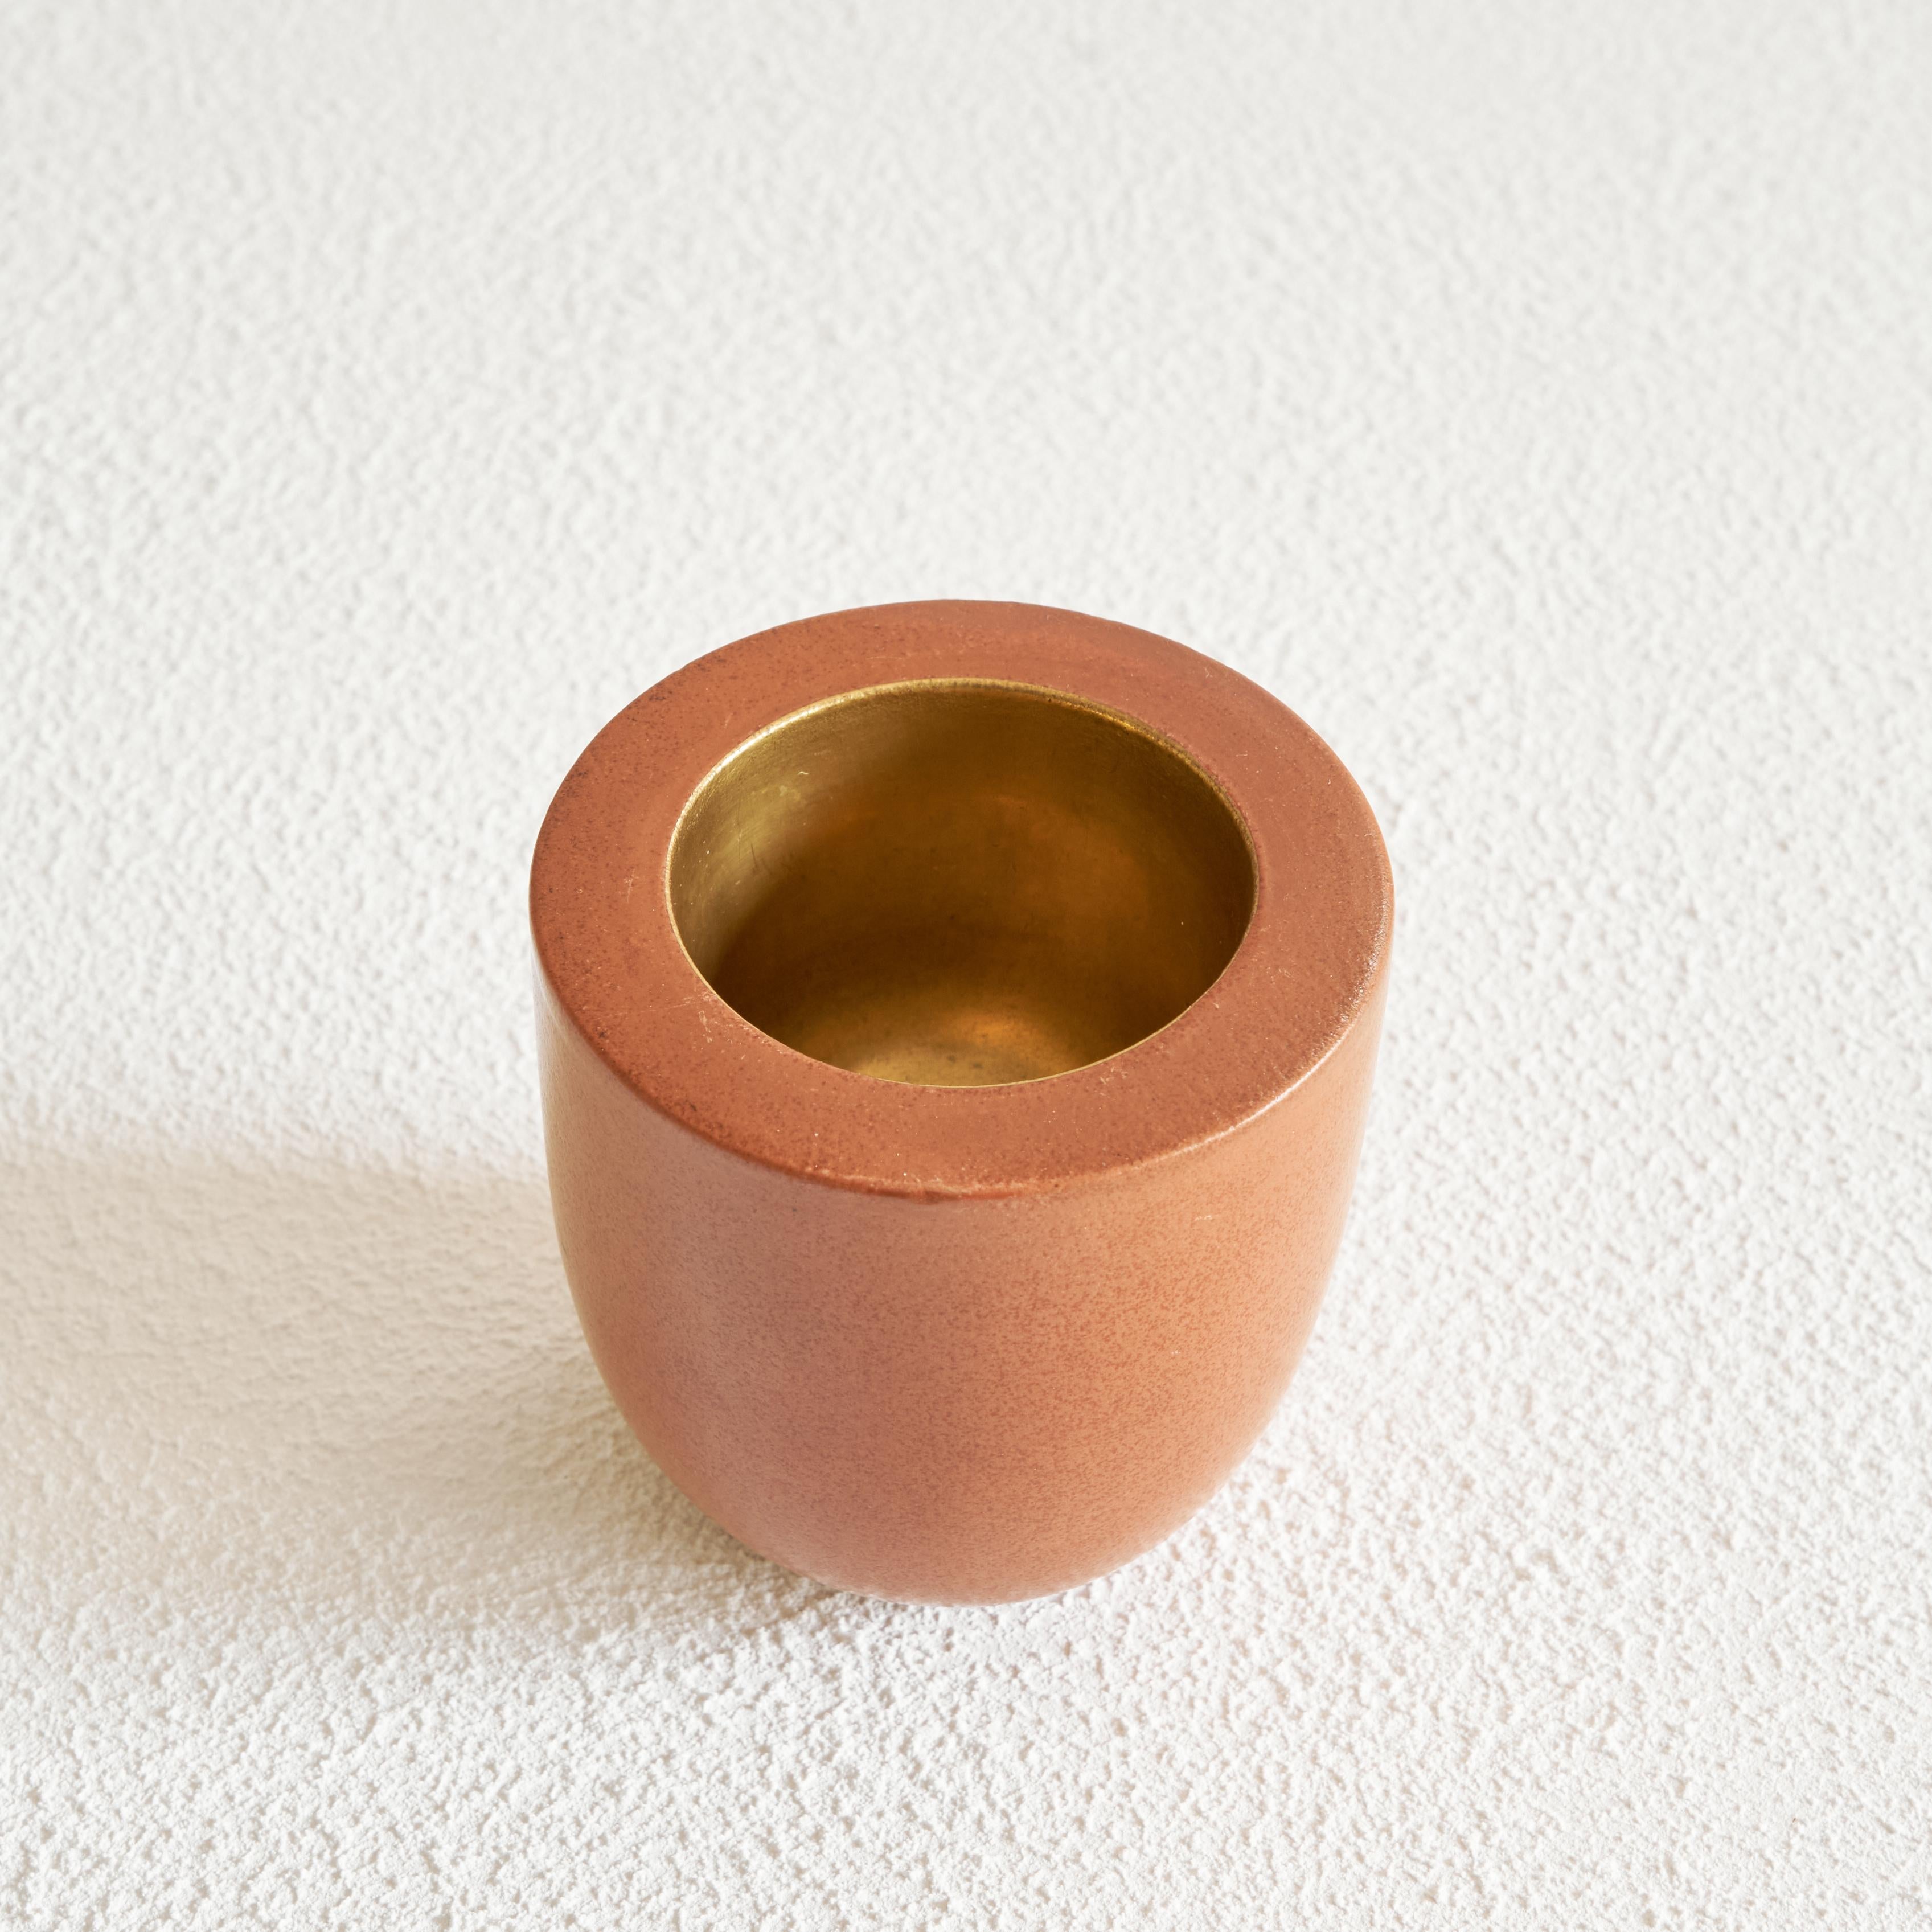 Gio Ponti for Richard Ginori vase in terracotta and gold, Italy, 1930s.

It is a wonderful little gem, this vase designed by Gio Ponti and made by Richard Ginori in the 1930s. Great simple design and beautiful contrast between the terracotta and